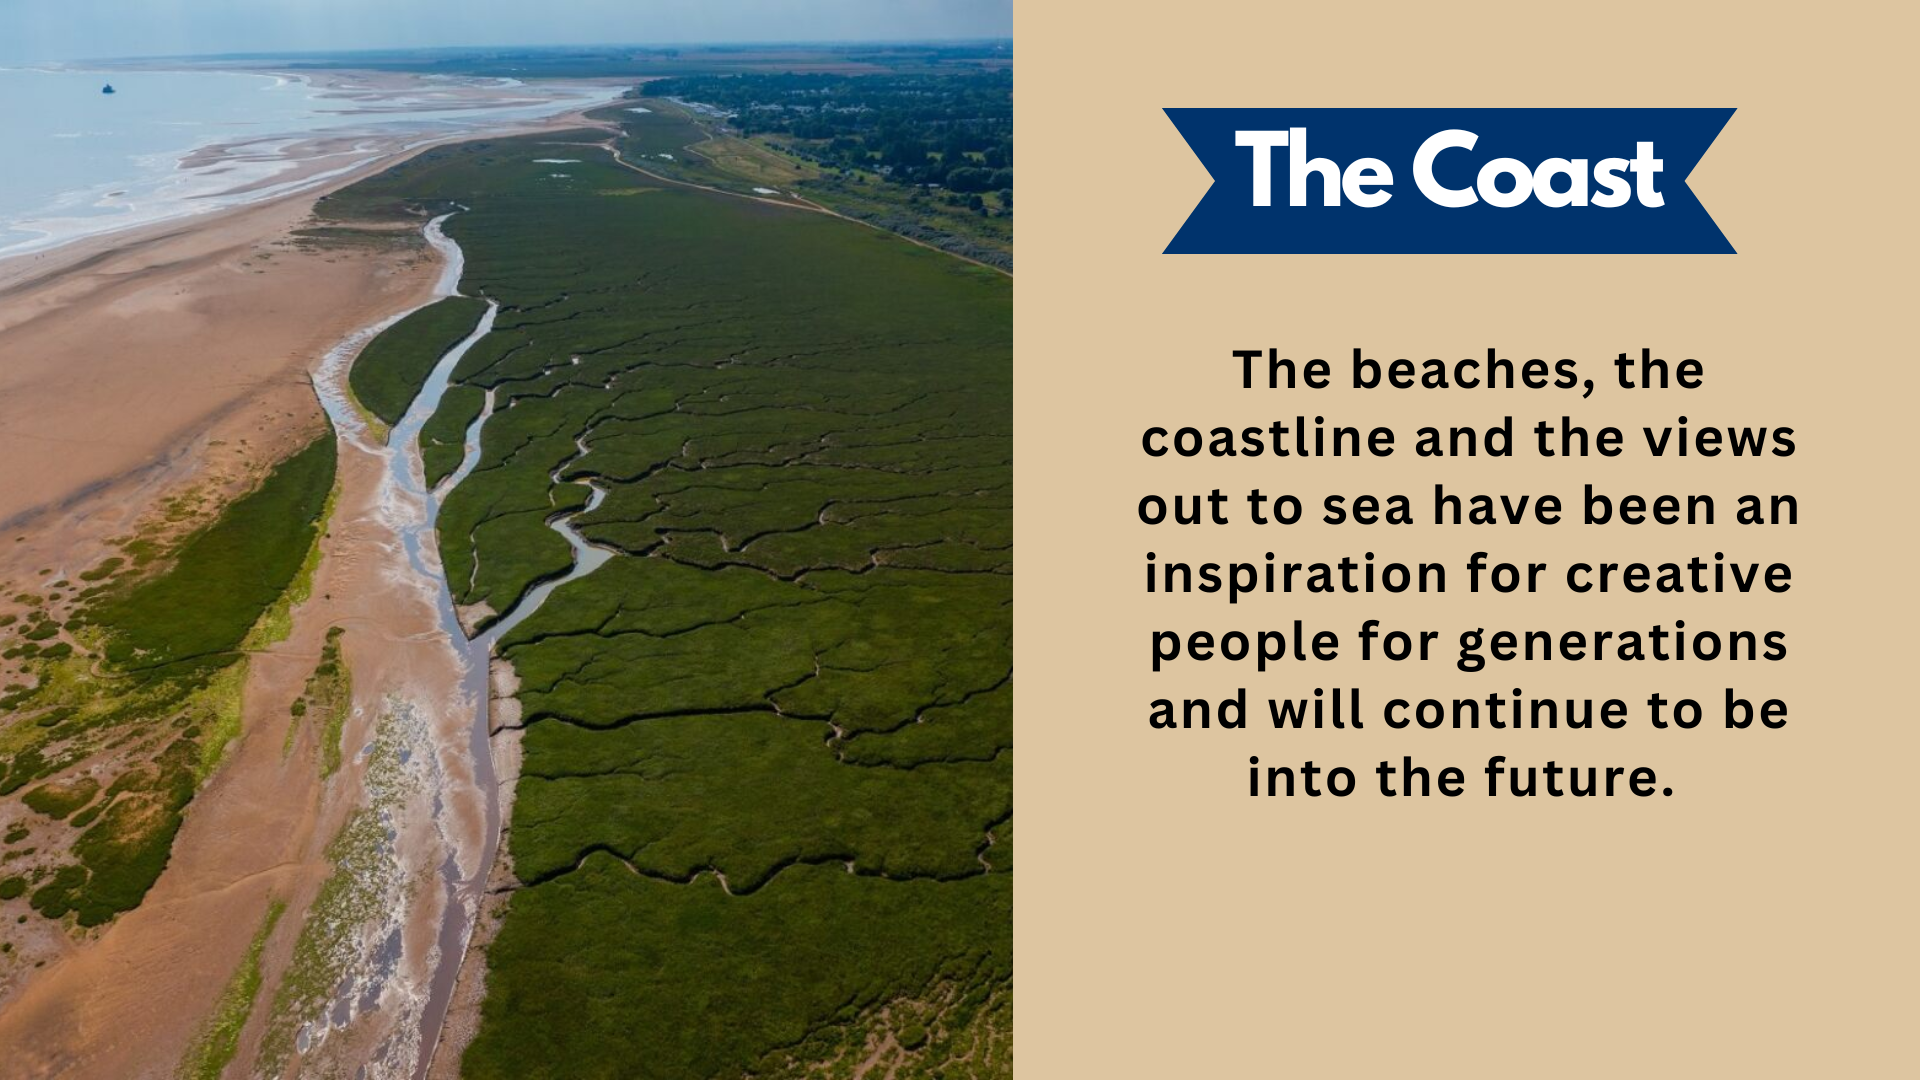 The Coast. The beaches, the coastline and the views out to sea have been an inspiration for creative people for generations and will continue to be into the future.